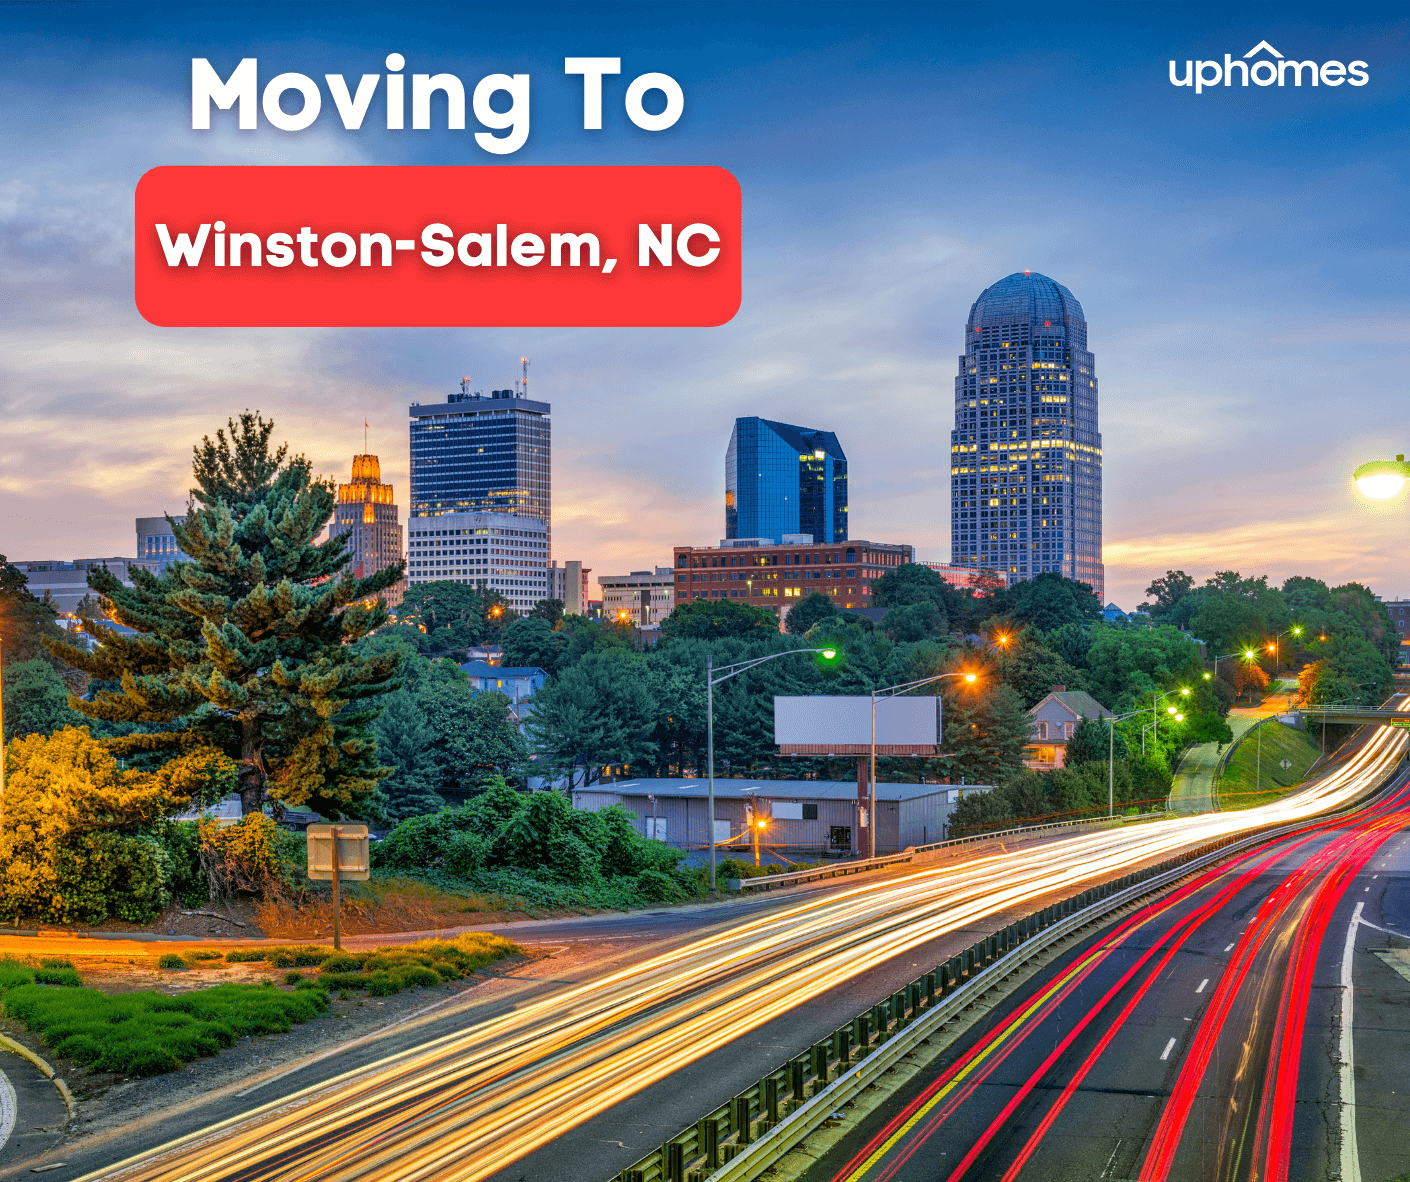 Living in Winston-Salem, NC - Pros and Cons